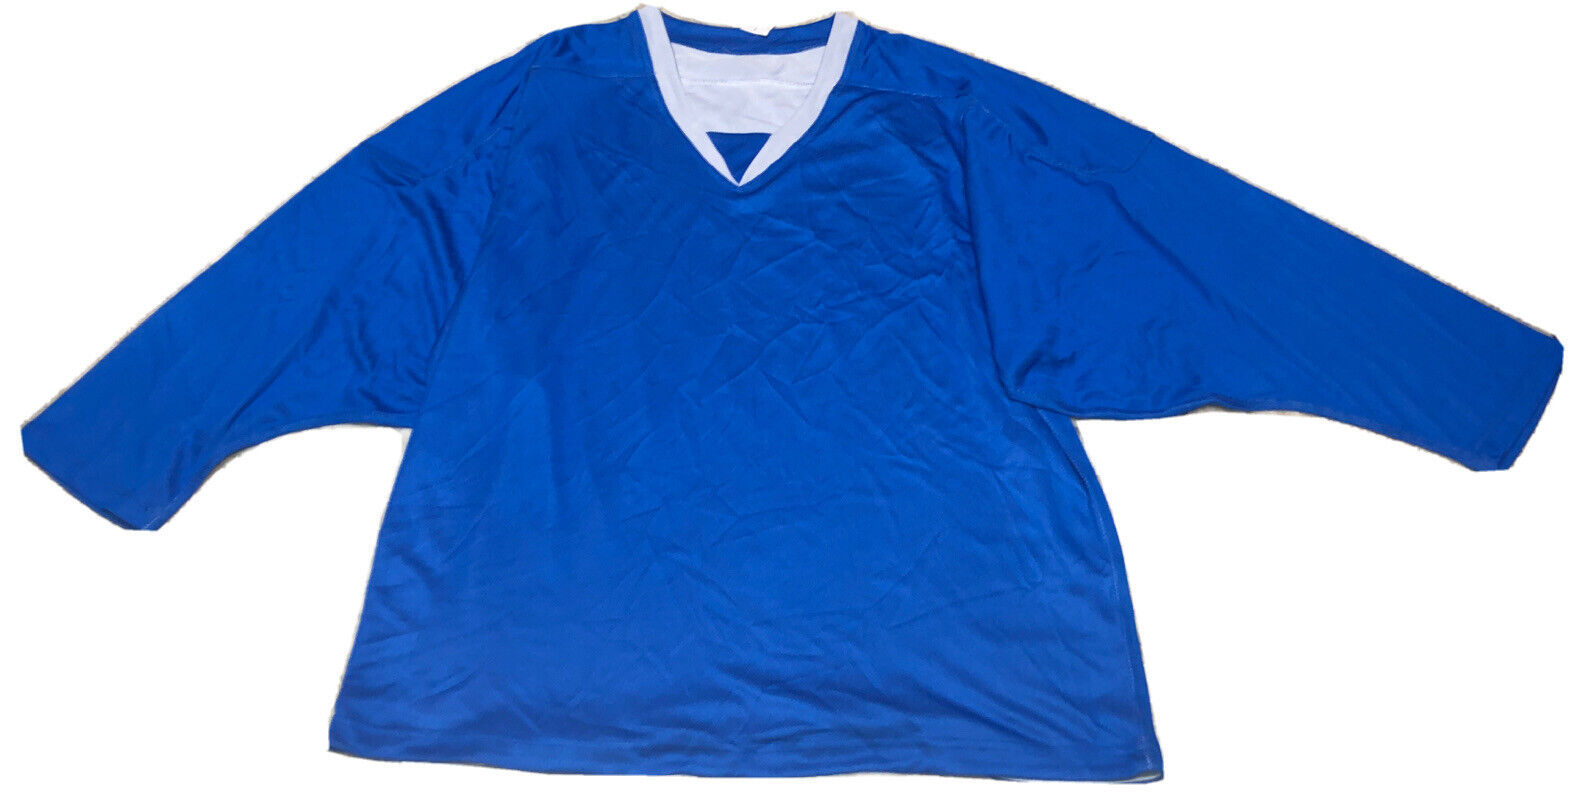 Primary image for Johnny Mac’s Reversible Adult Small Practice Hockey Jersey Royal/White-SHIP24HRS